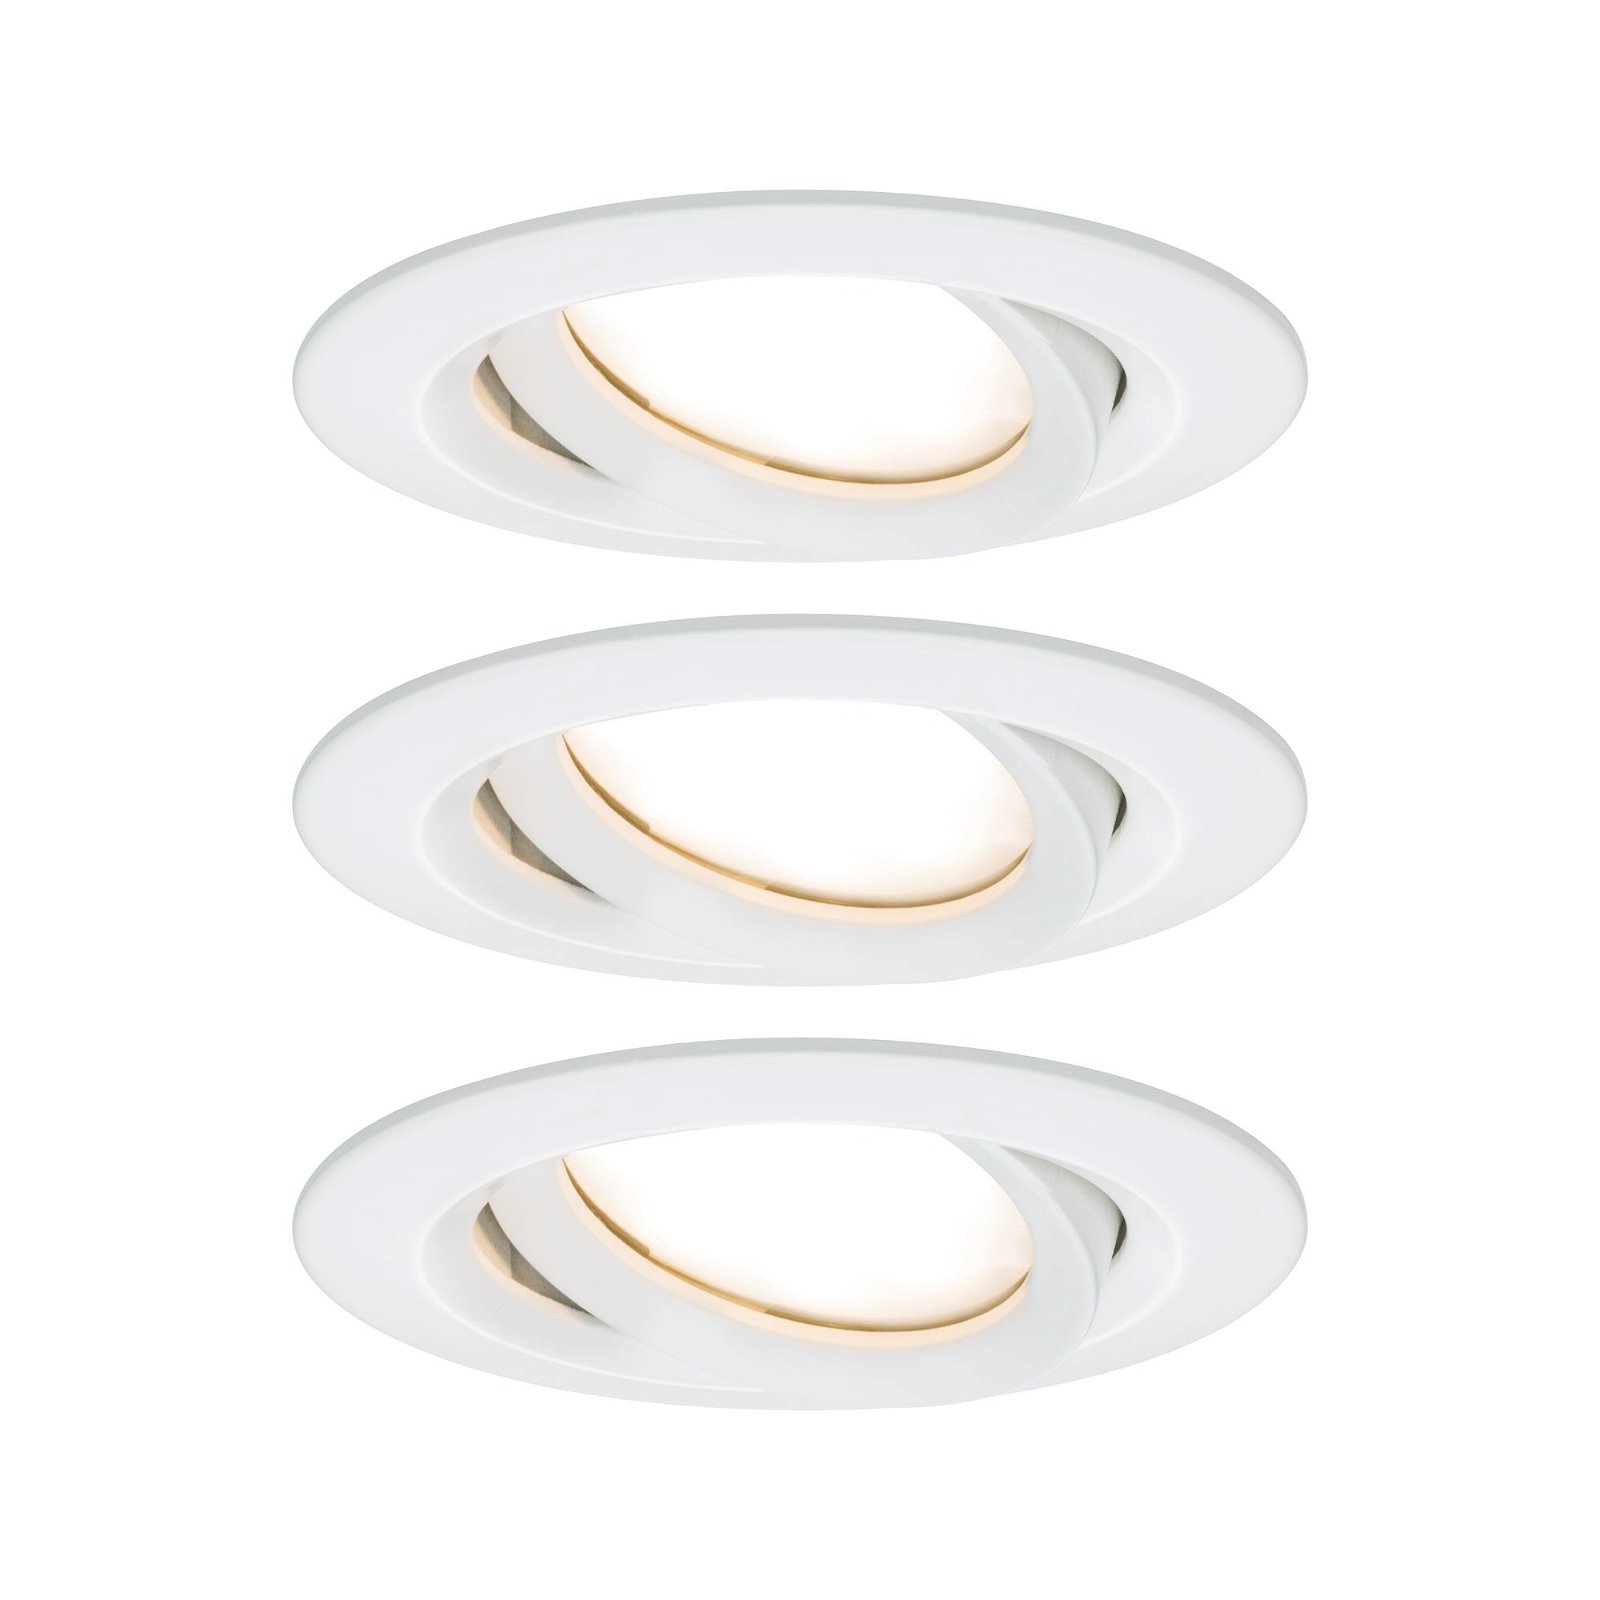 directly light solutions – Premium spotlight from manufacturer the Nova Recessed Plus